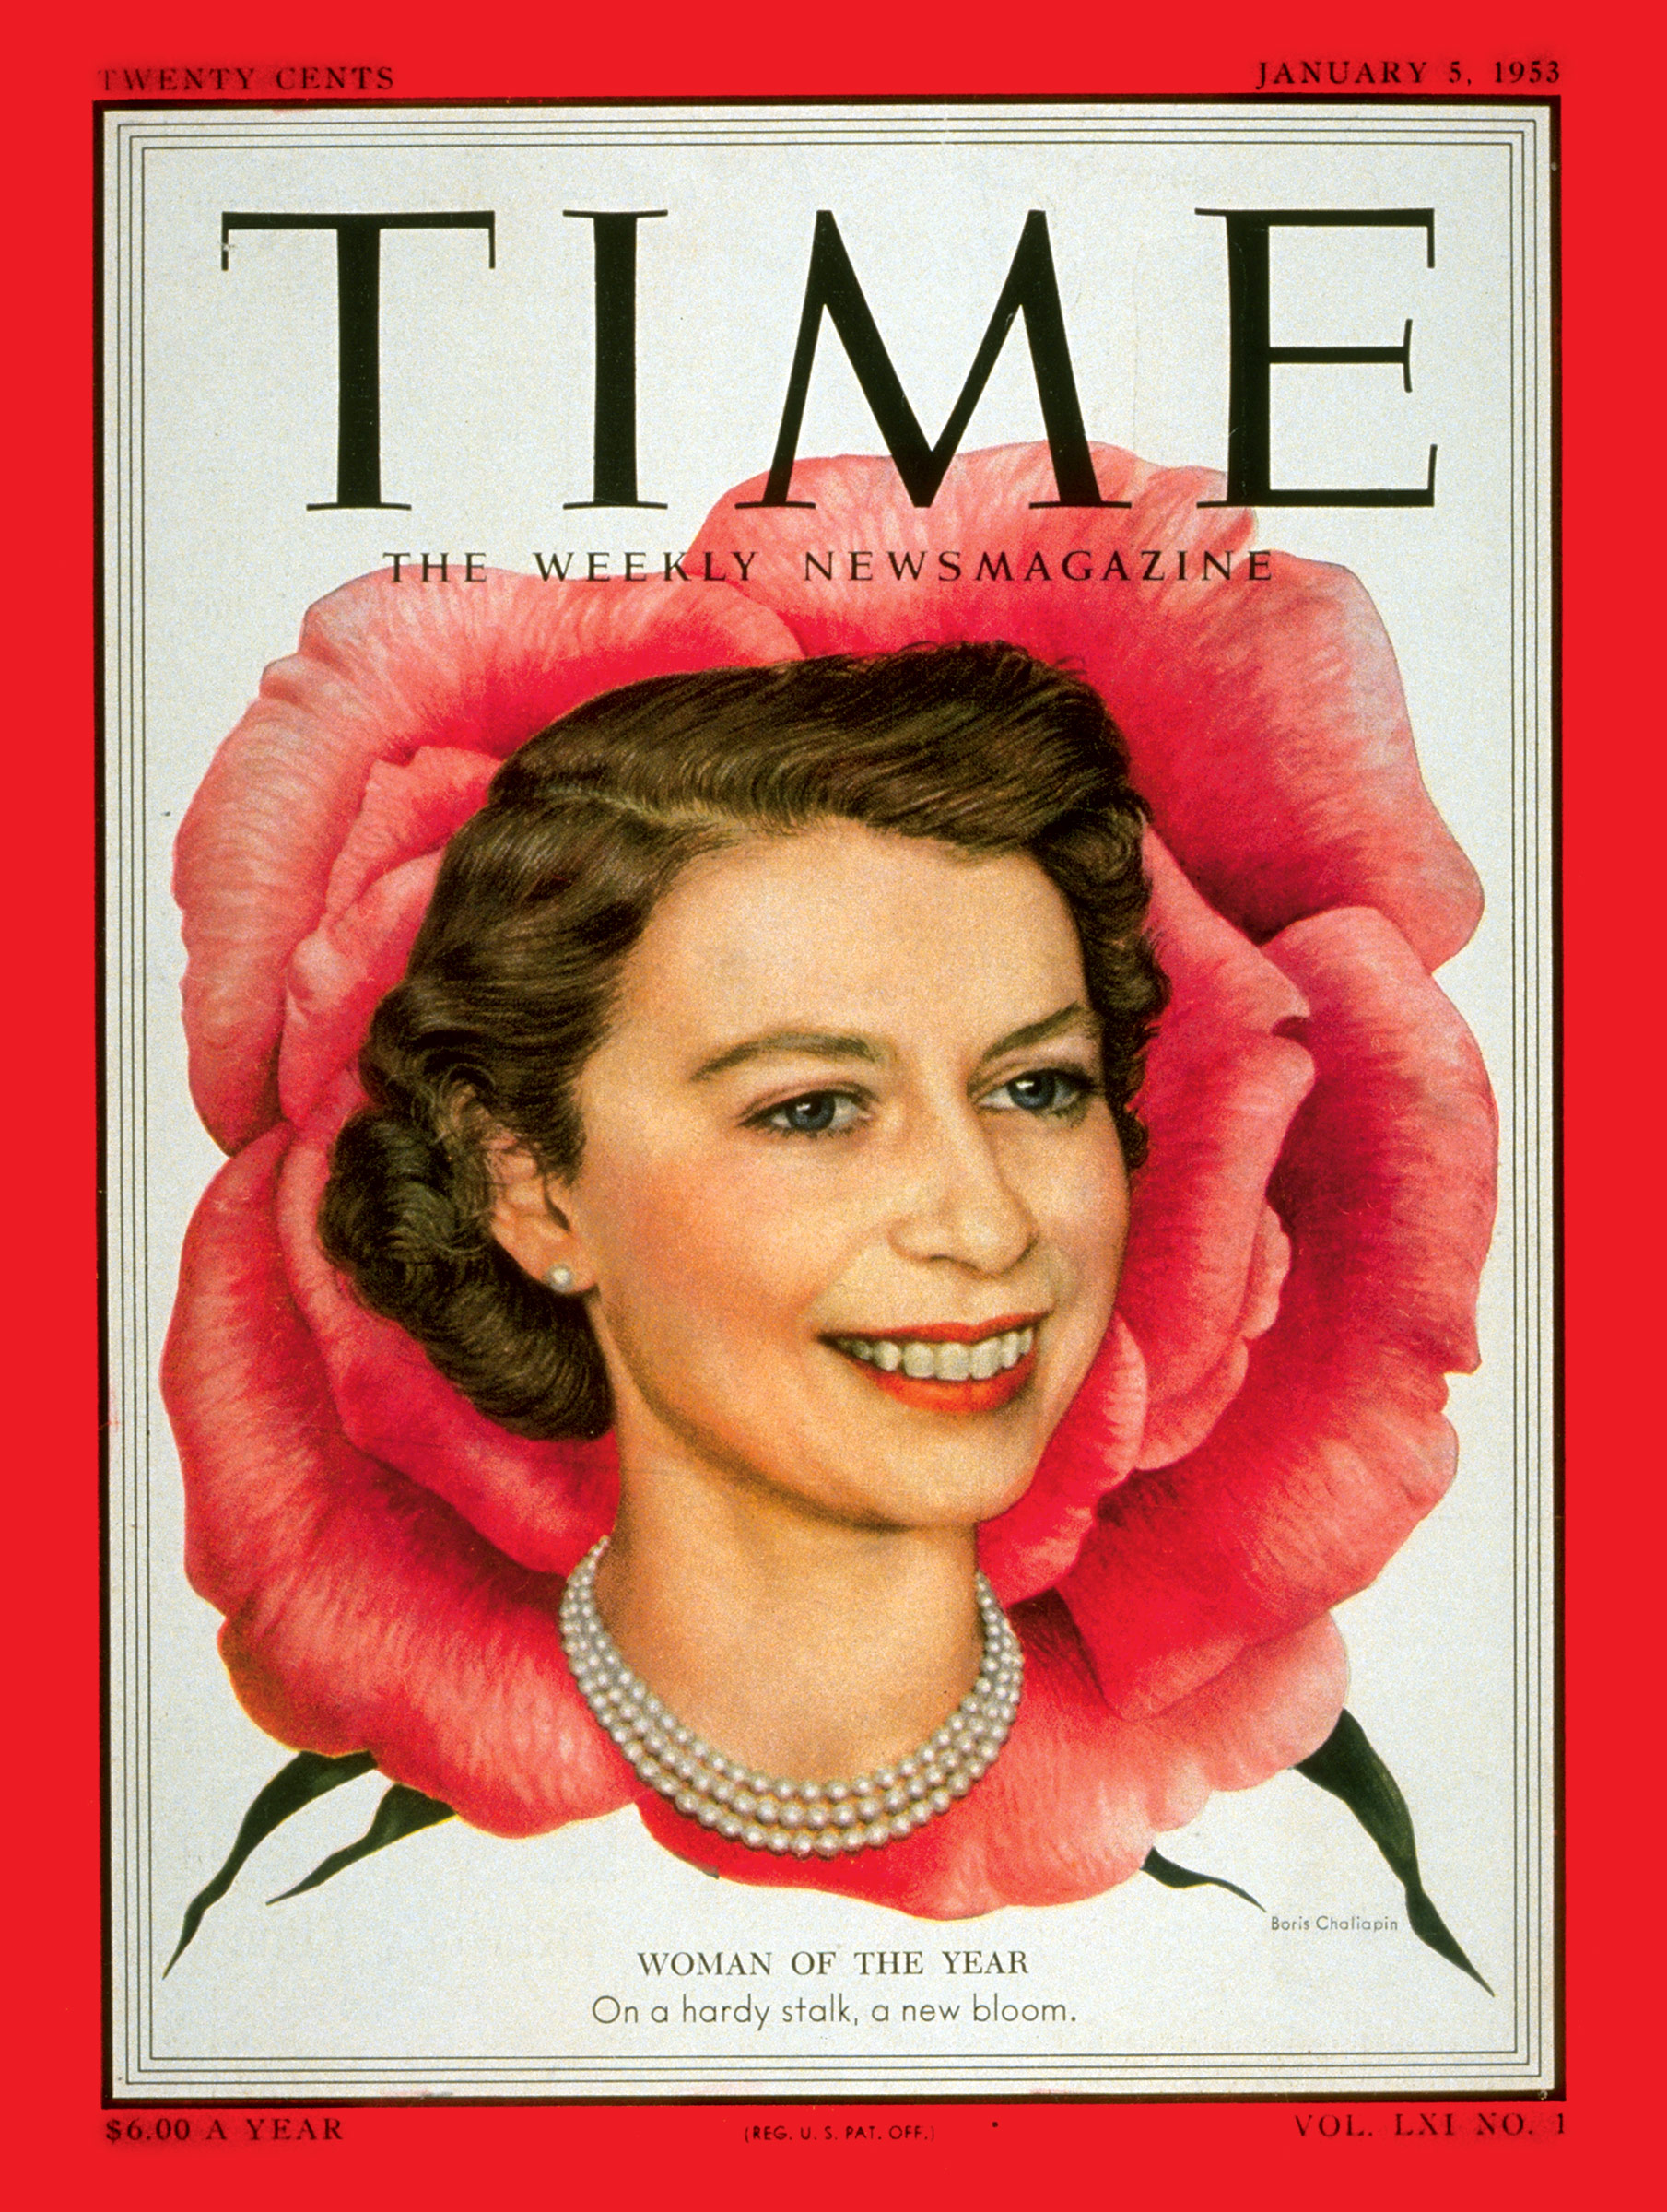 Queen Elizabeth, as Person of the Year for 1952, on the Jan. 5, 1953, cover of TIME (Boris Chaliapin)